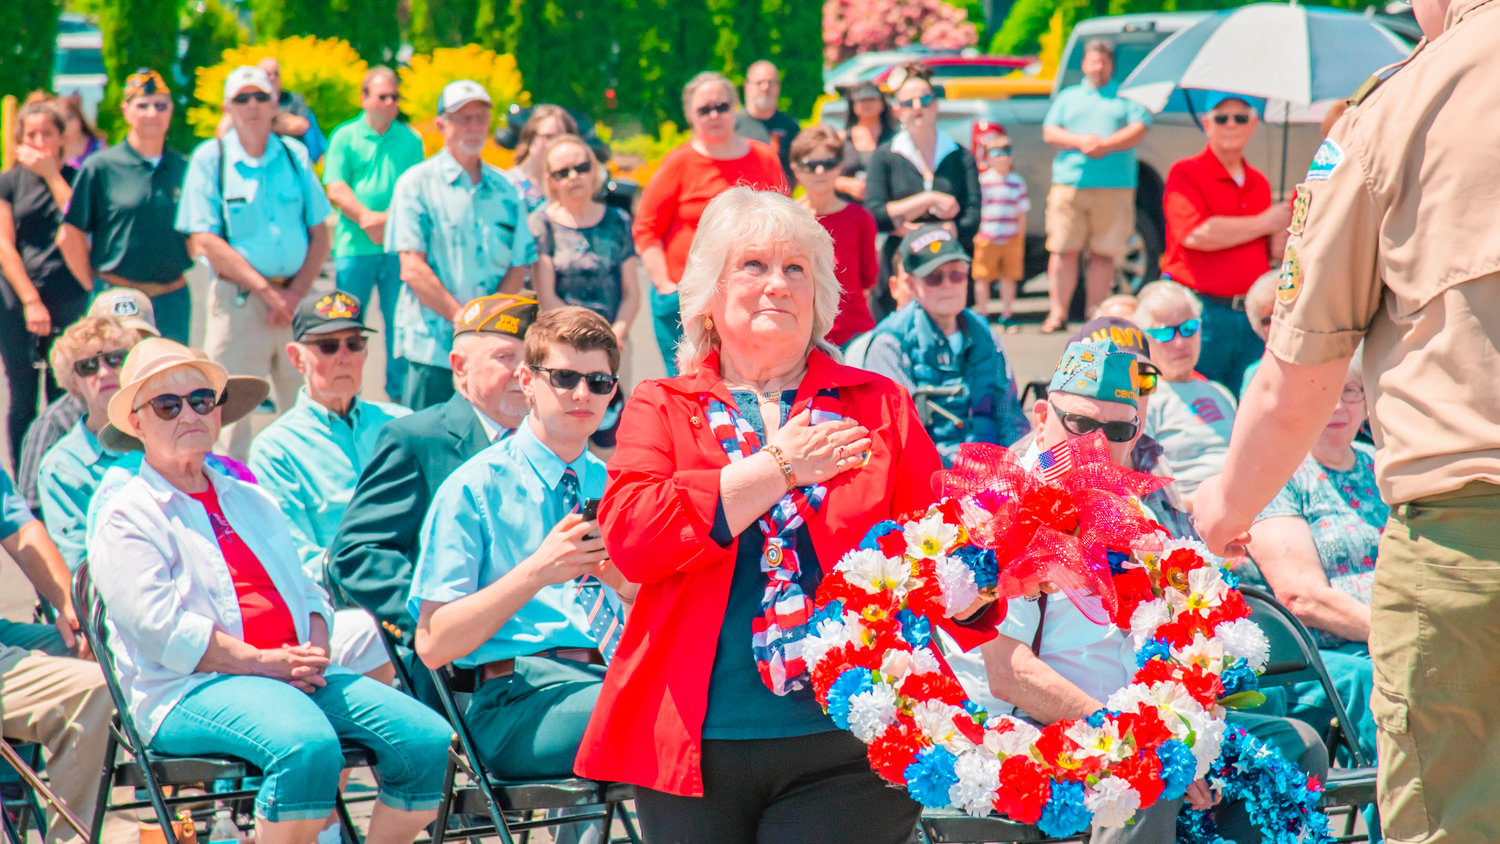 Glenda Thomas holds her hand over her heart as she hands a wreath to a scout to be placed at the base of a flag pole outside the Veterans Memorial Museum Monday afternoon in Chehalis as part of a Memorial Day ceremony.